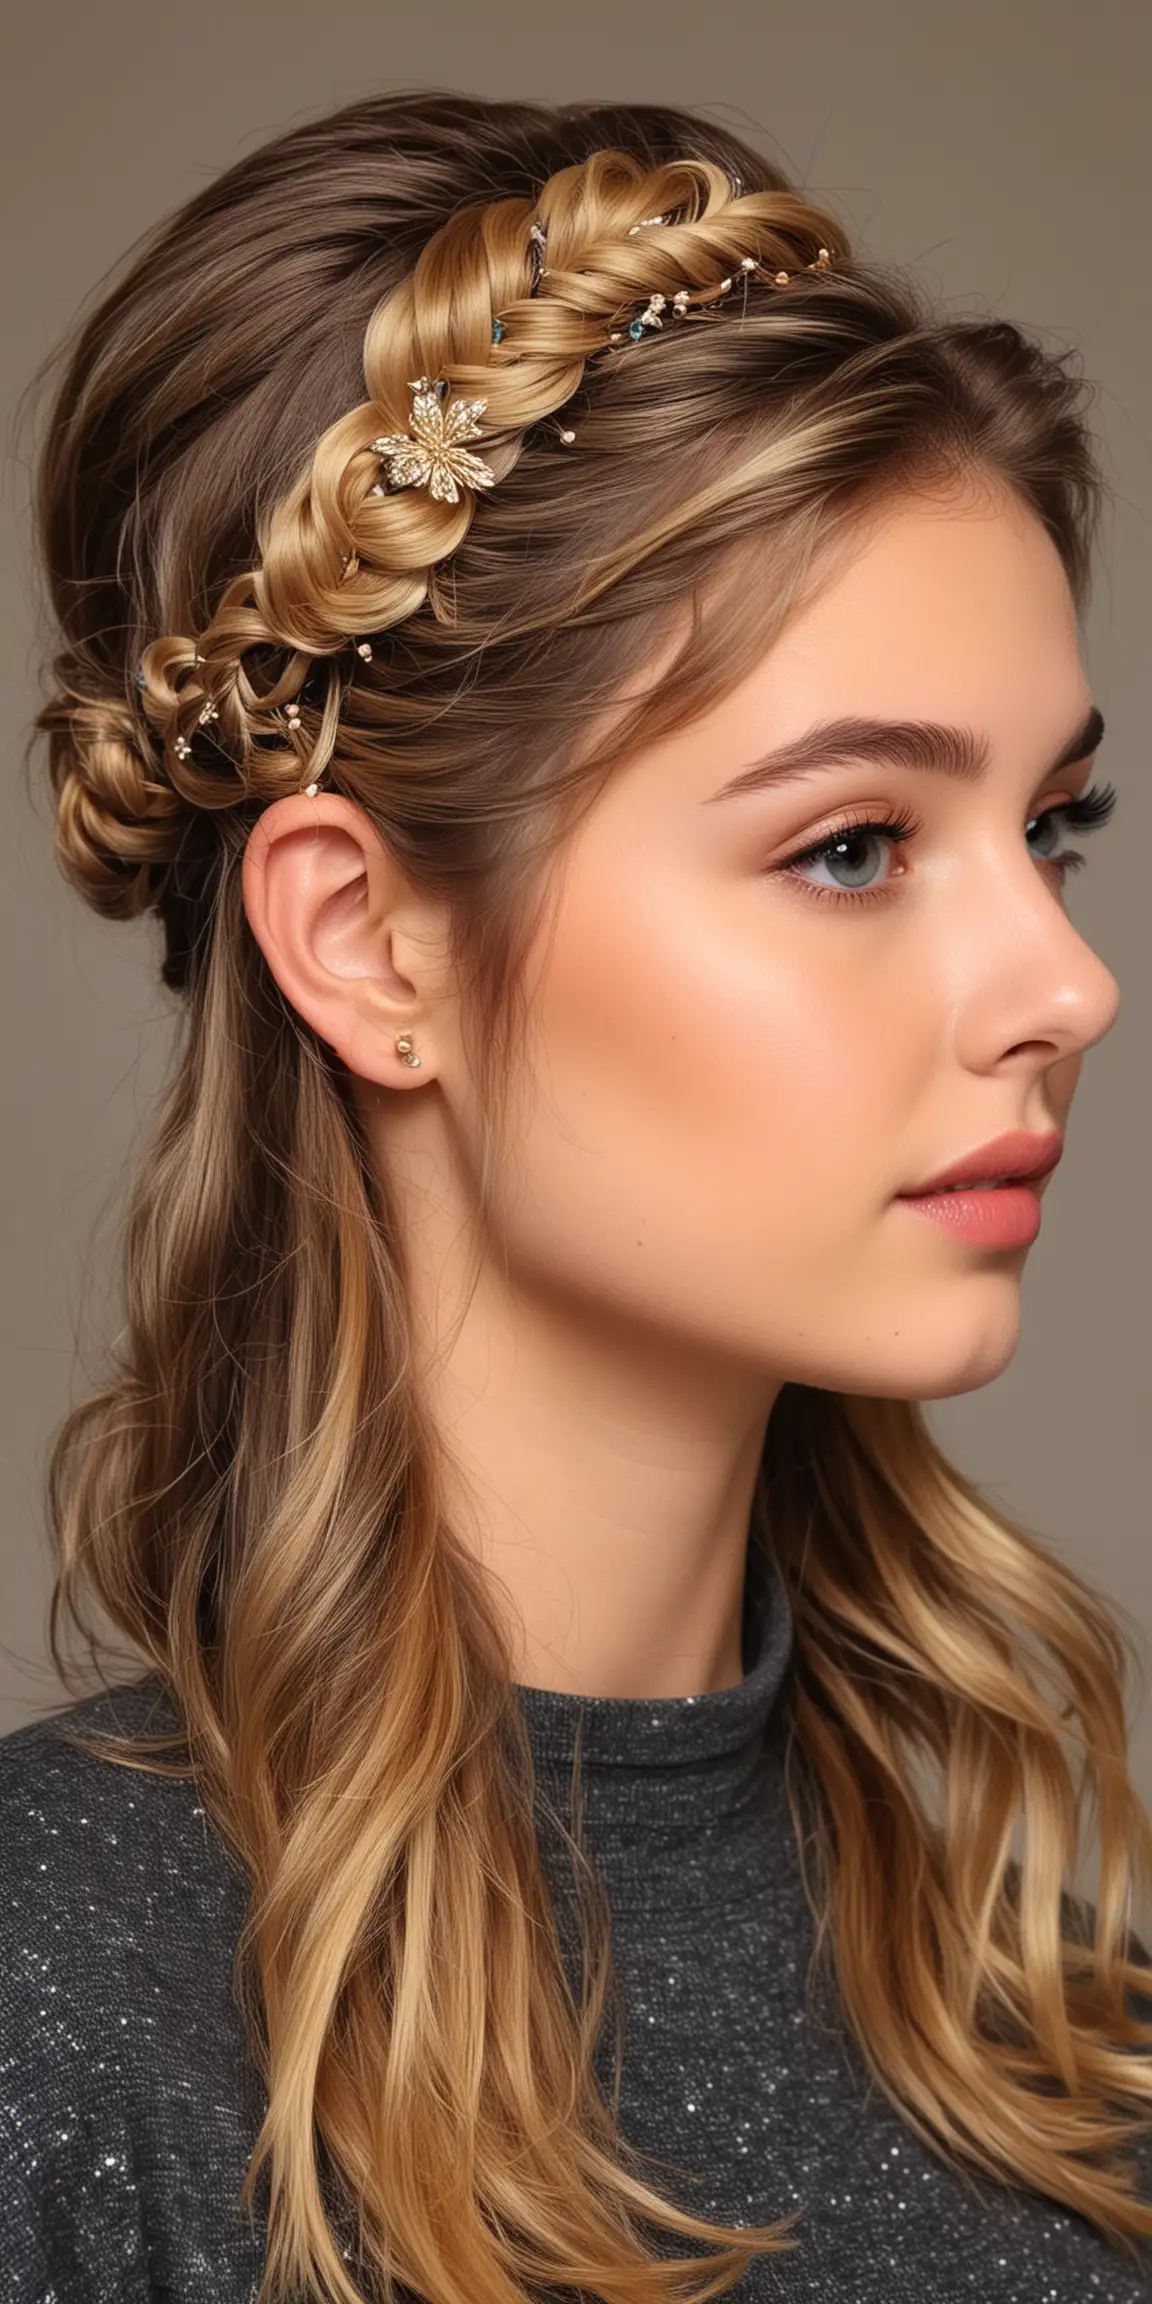 Simple and Stylish Girls Hairstyles with Chic Hair Accessories